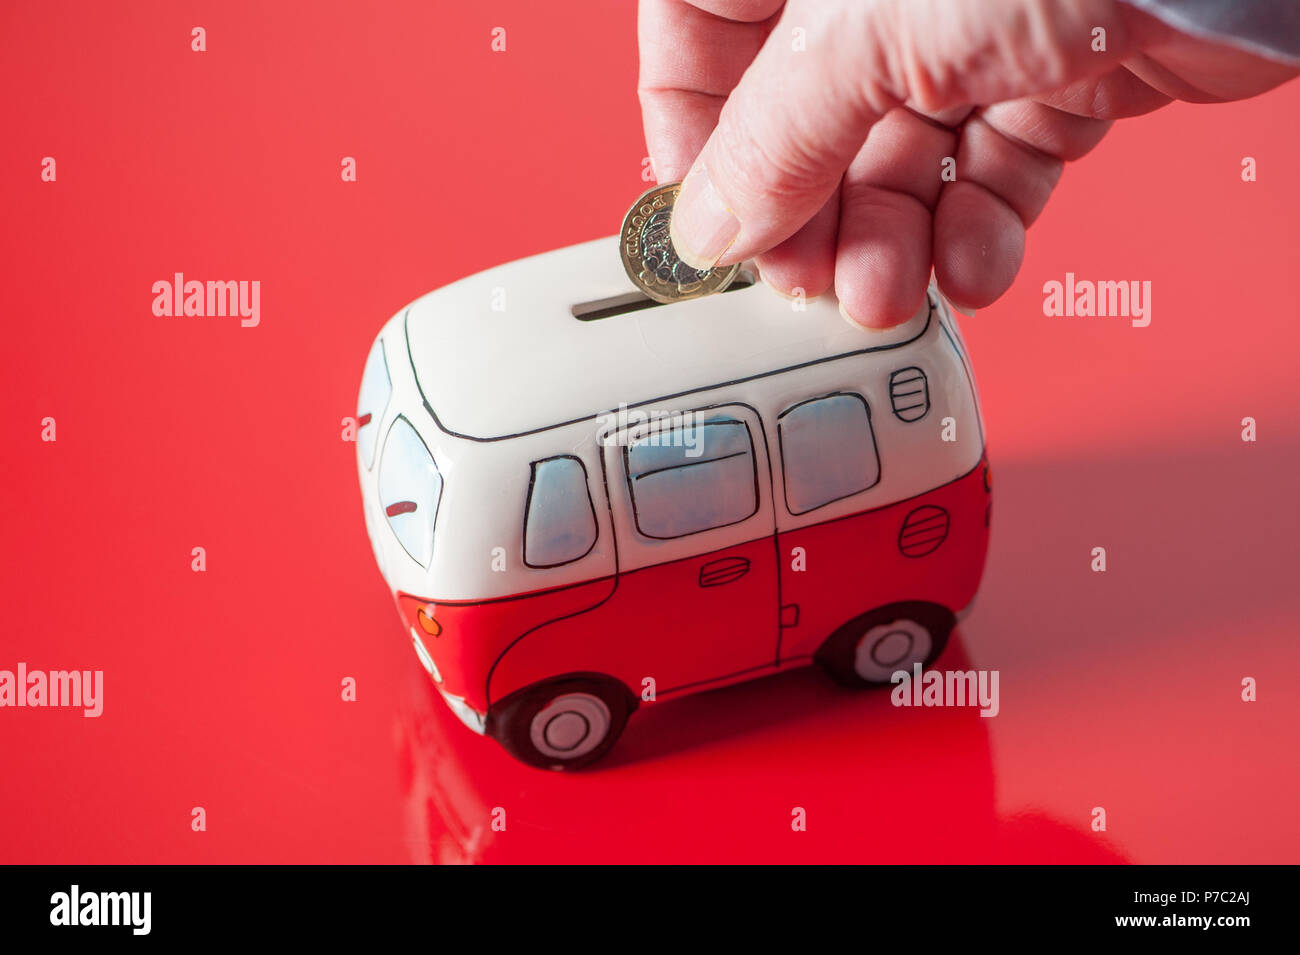 A saver putting a UK pound coin into his money box which looks like a VW mini bus Stock Photo